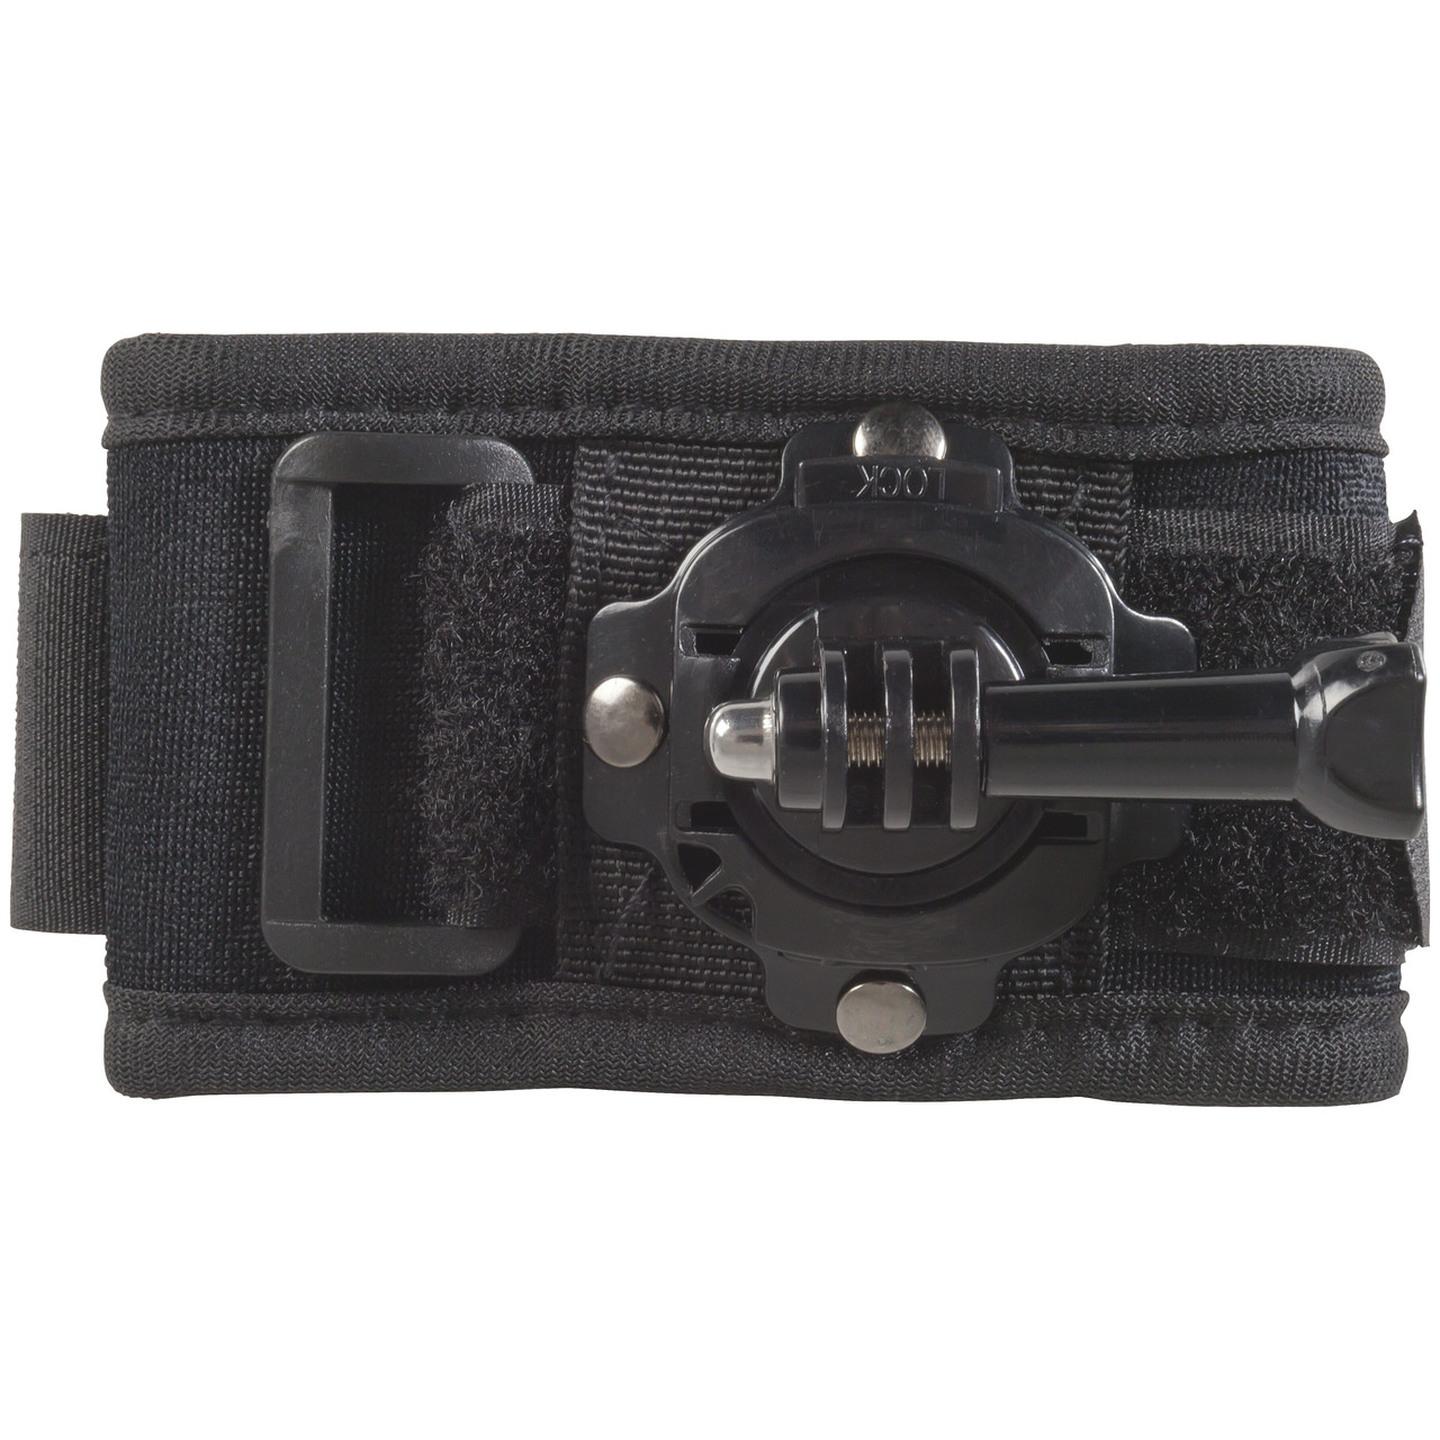 360 Wrist Mount for Action Cameras